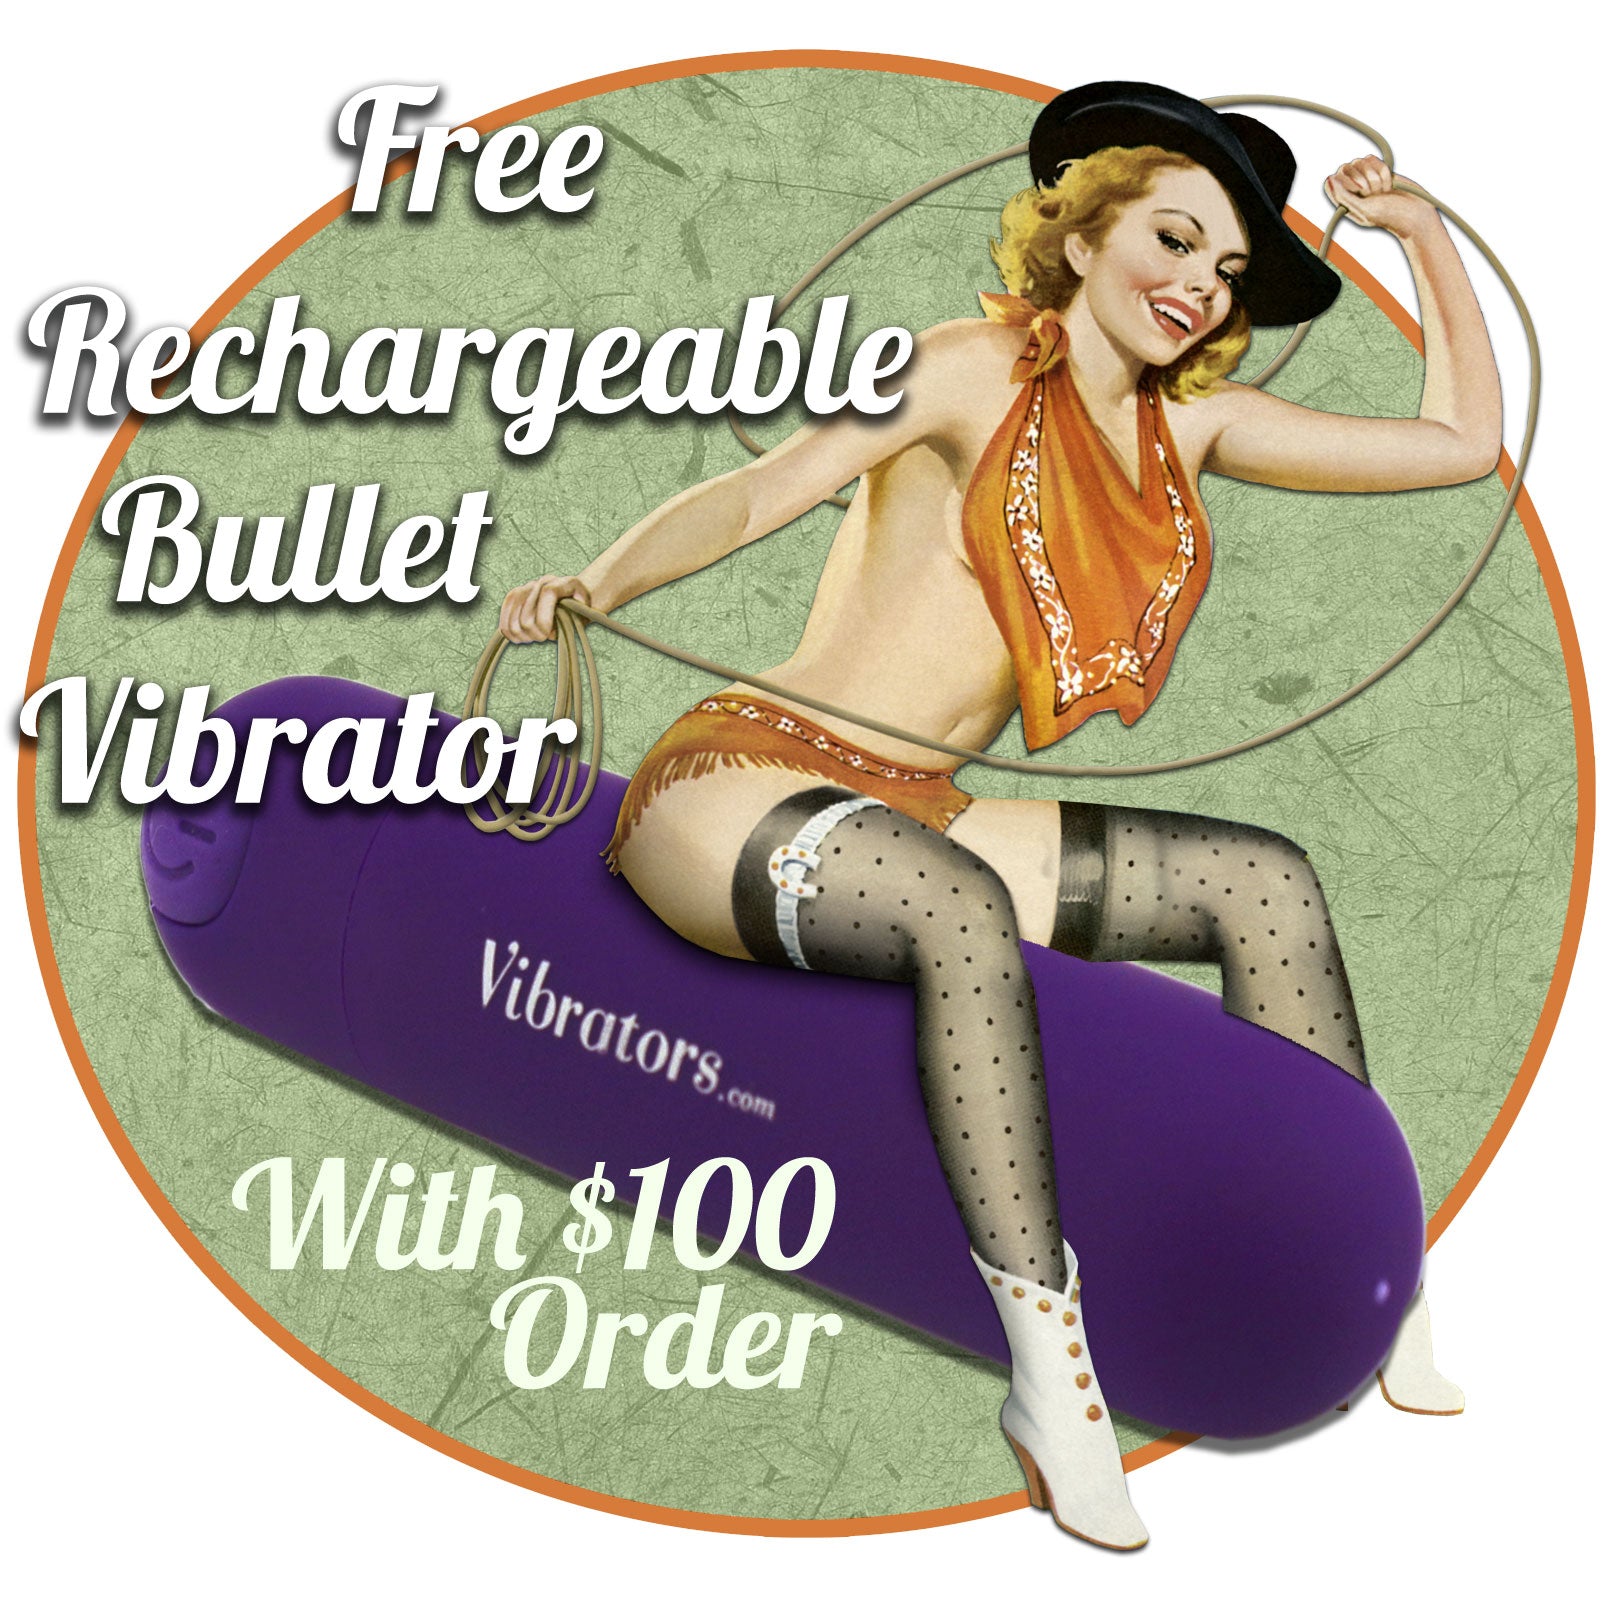 Image of Free Rechargeable Vibrator With A $100 Vibrators.com Order